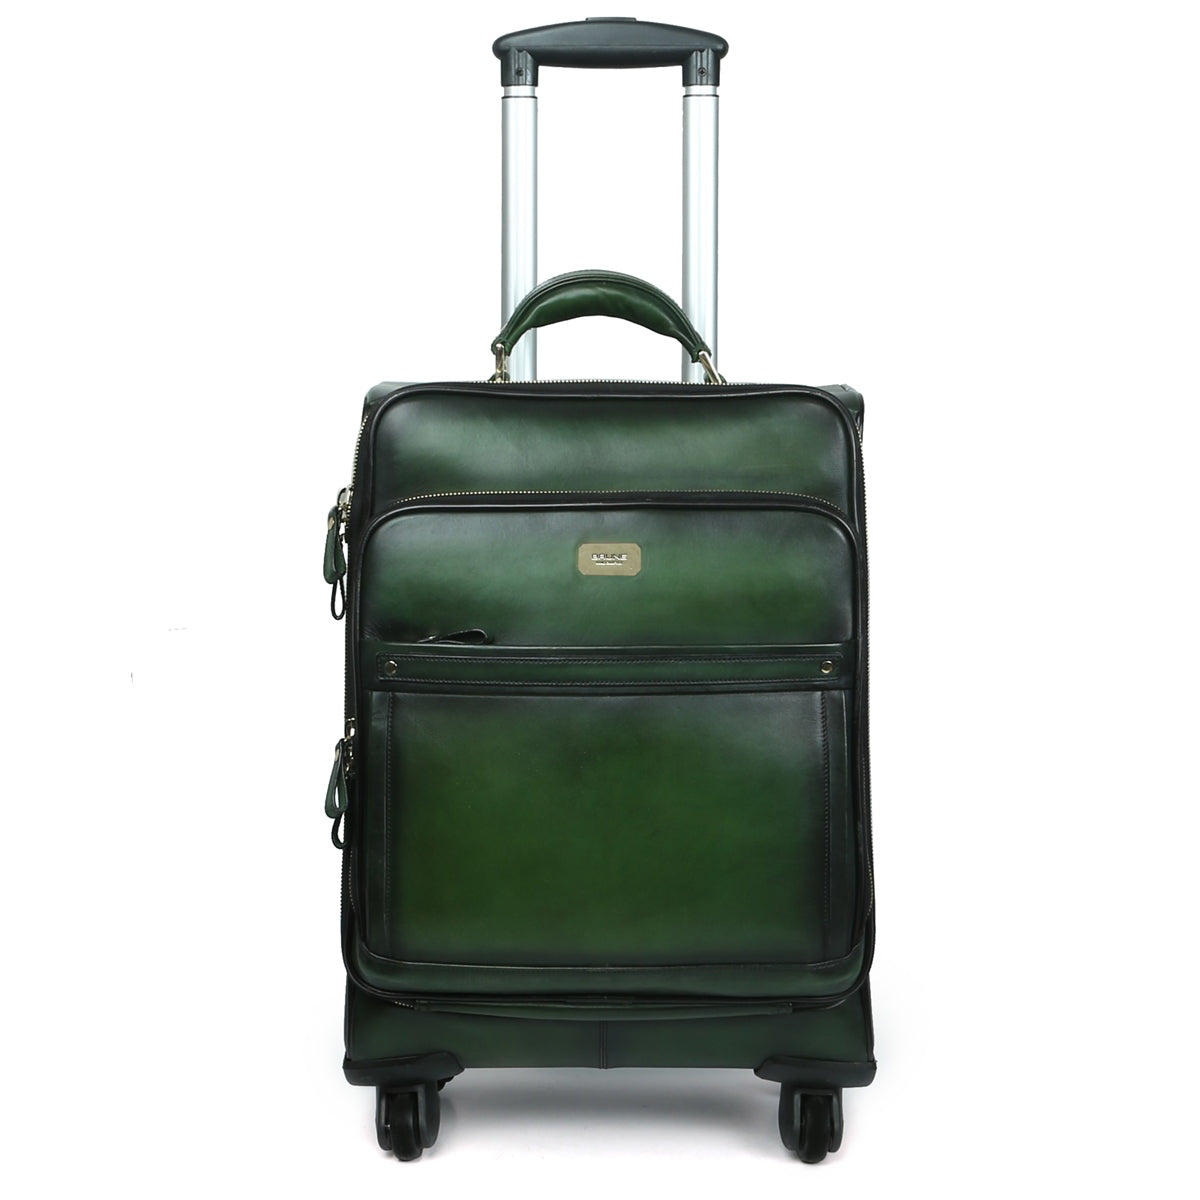 Arrival Trolley bag 4 wheel Travel luggage and Travel Trolley bag with  premium fabric at Rs 1400 | Luggage Bags in New Delhi | ID: 2851647333155